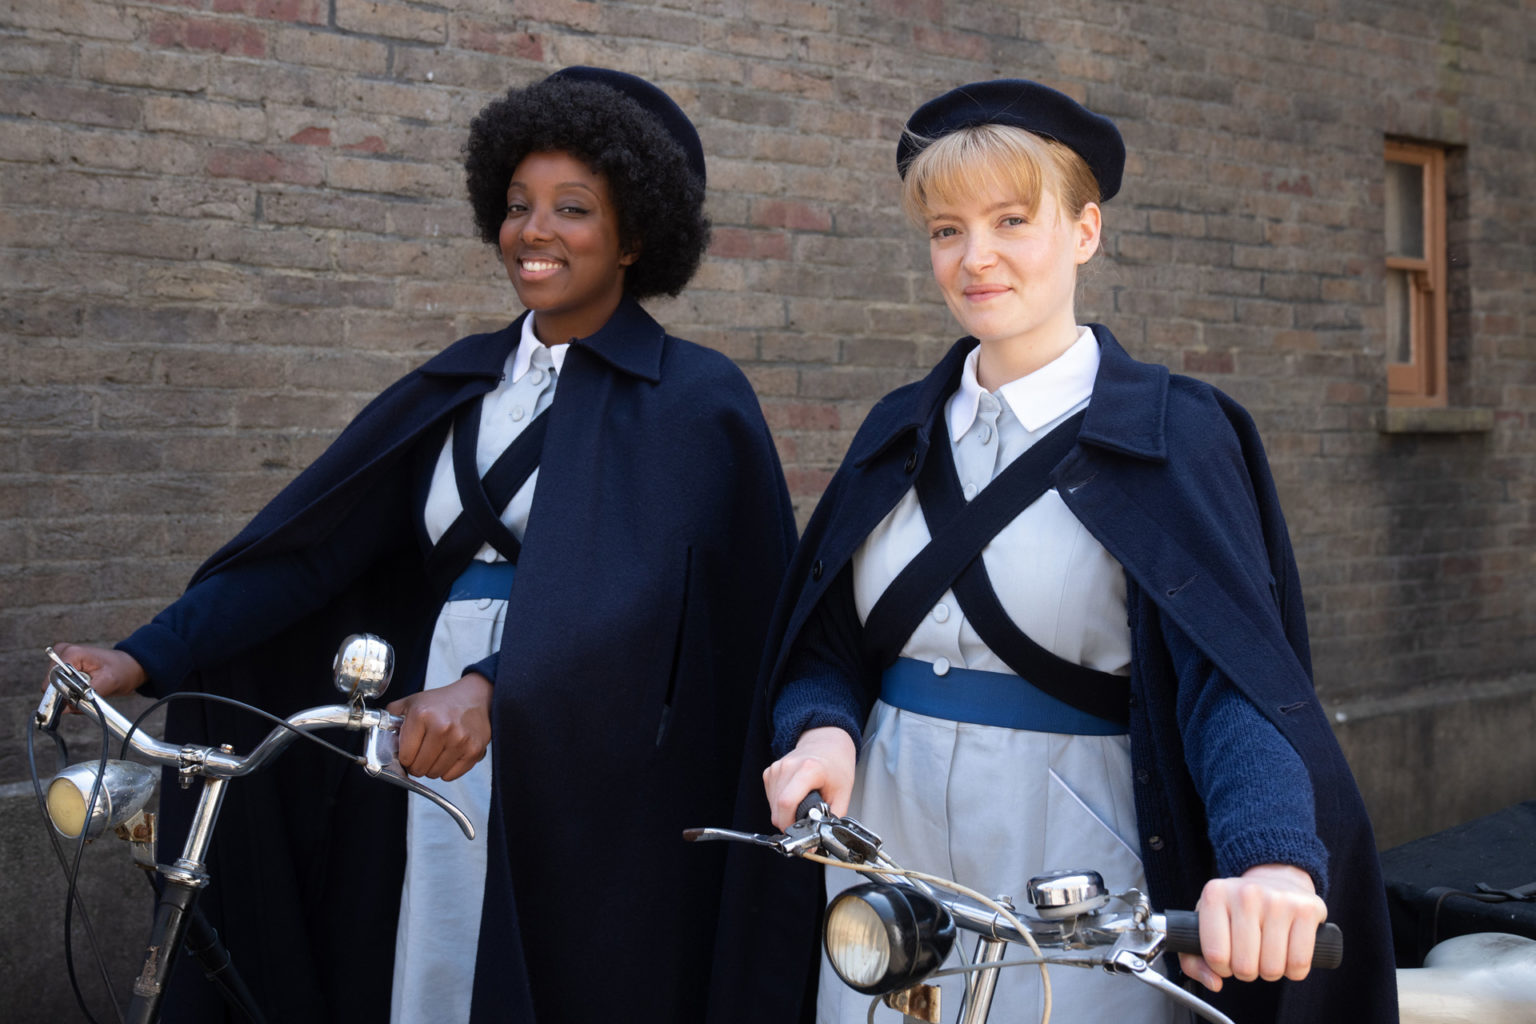 When Is The Call The Midwife Christmas Special On TV In 2023?